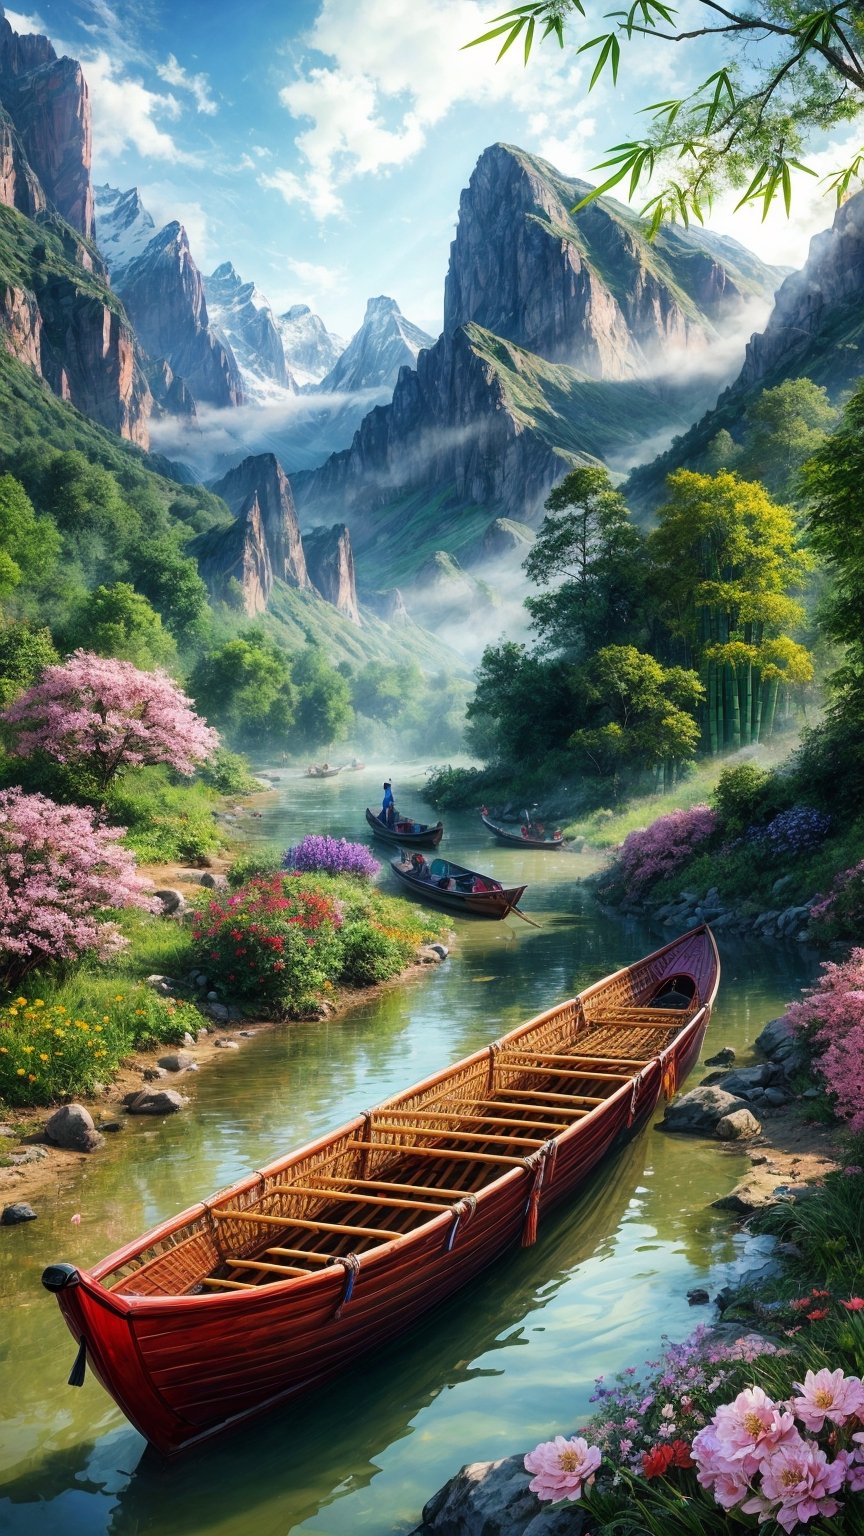 masterpiece, best quality, official_art, aesthetic and beautiful, potrait of bamboo raft in foggy river, flowers and mountains along riverside, spring_season,boats, valley, no_human